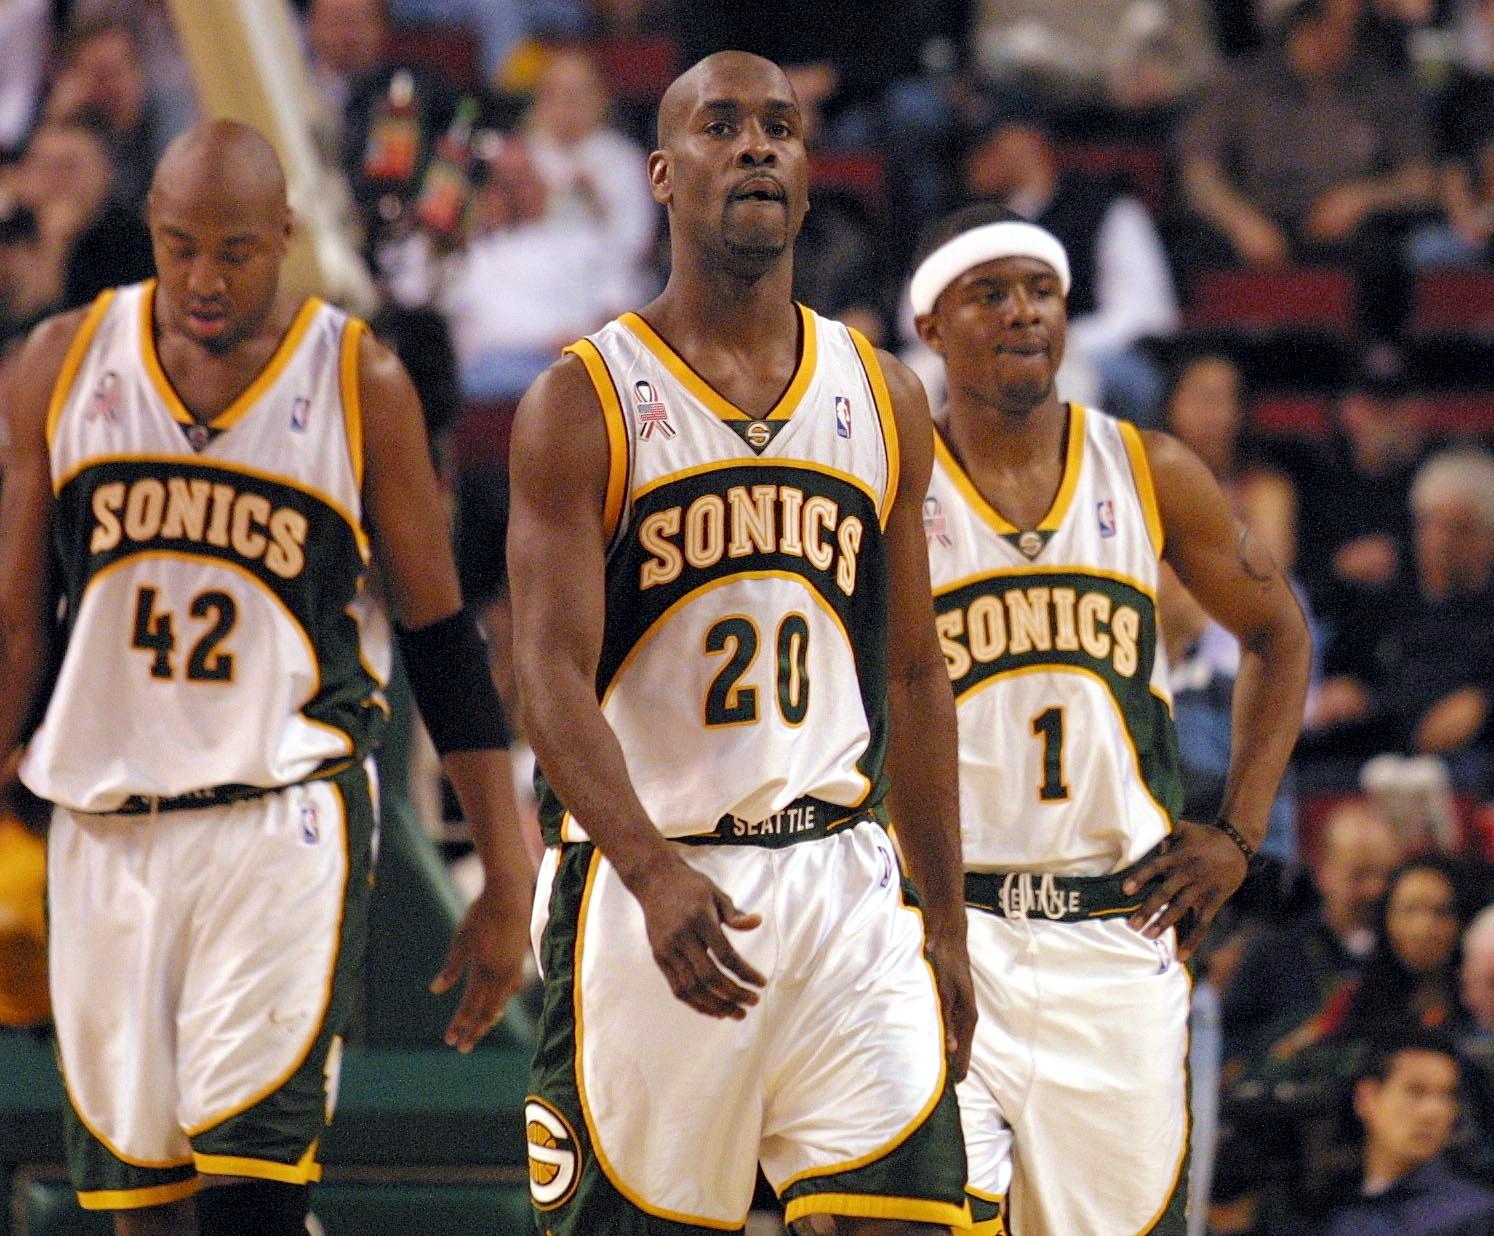 Seattle Supersonics Gary Payton (C), Vin Baker (L) and Shammond Williams (R) endure the final seconds of their team's 102-75 loss to the San Antonio Spurs in Seattle in 2002.